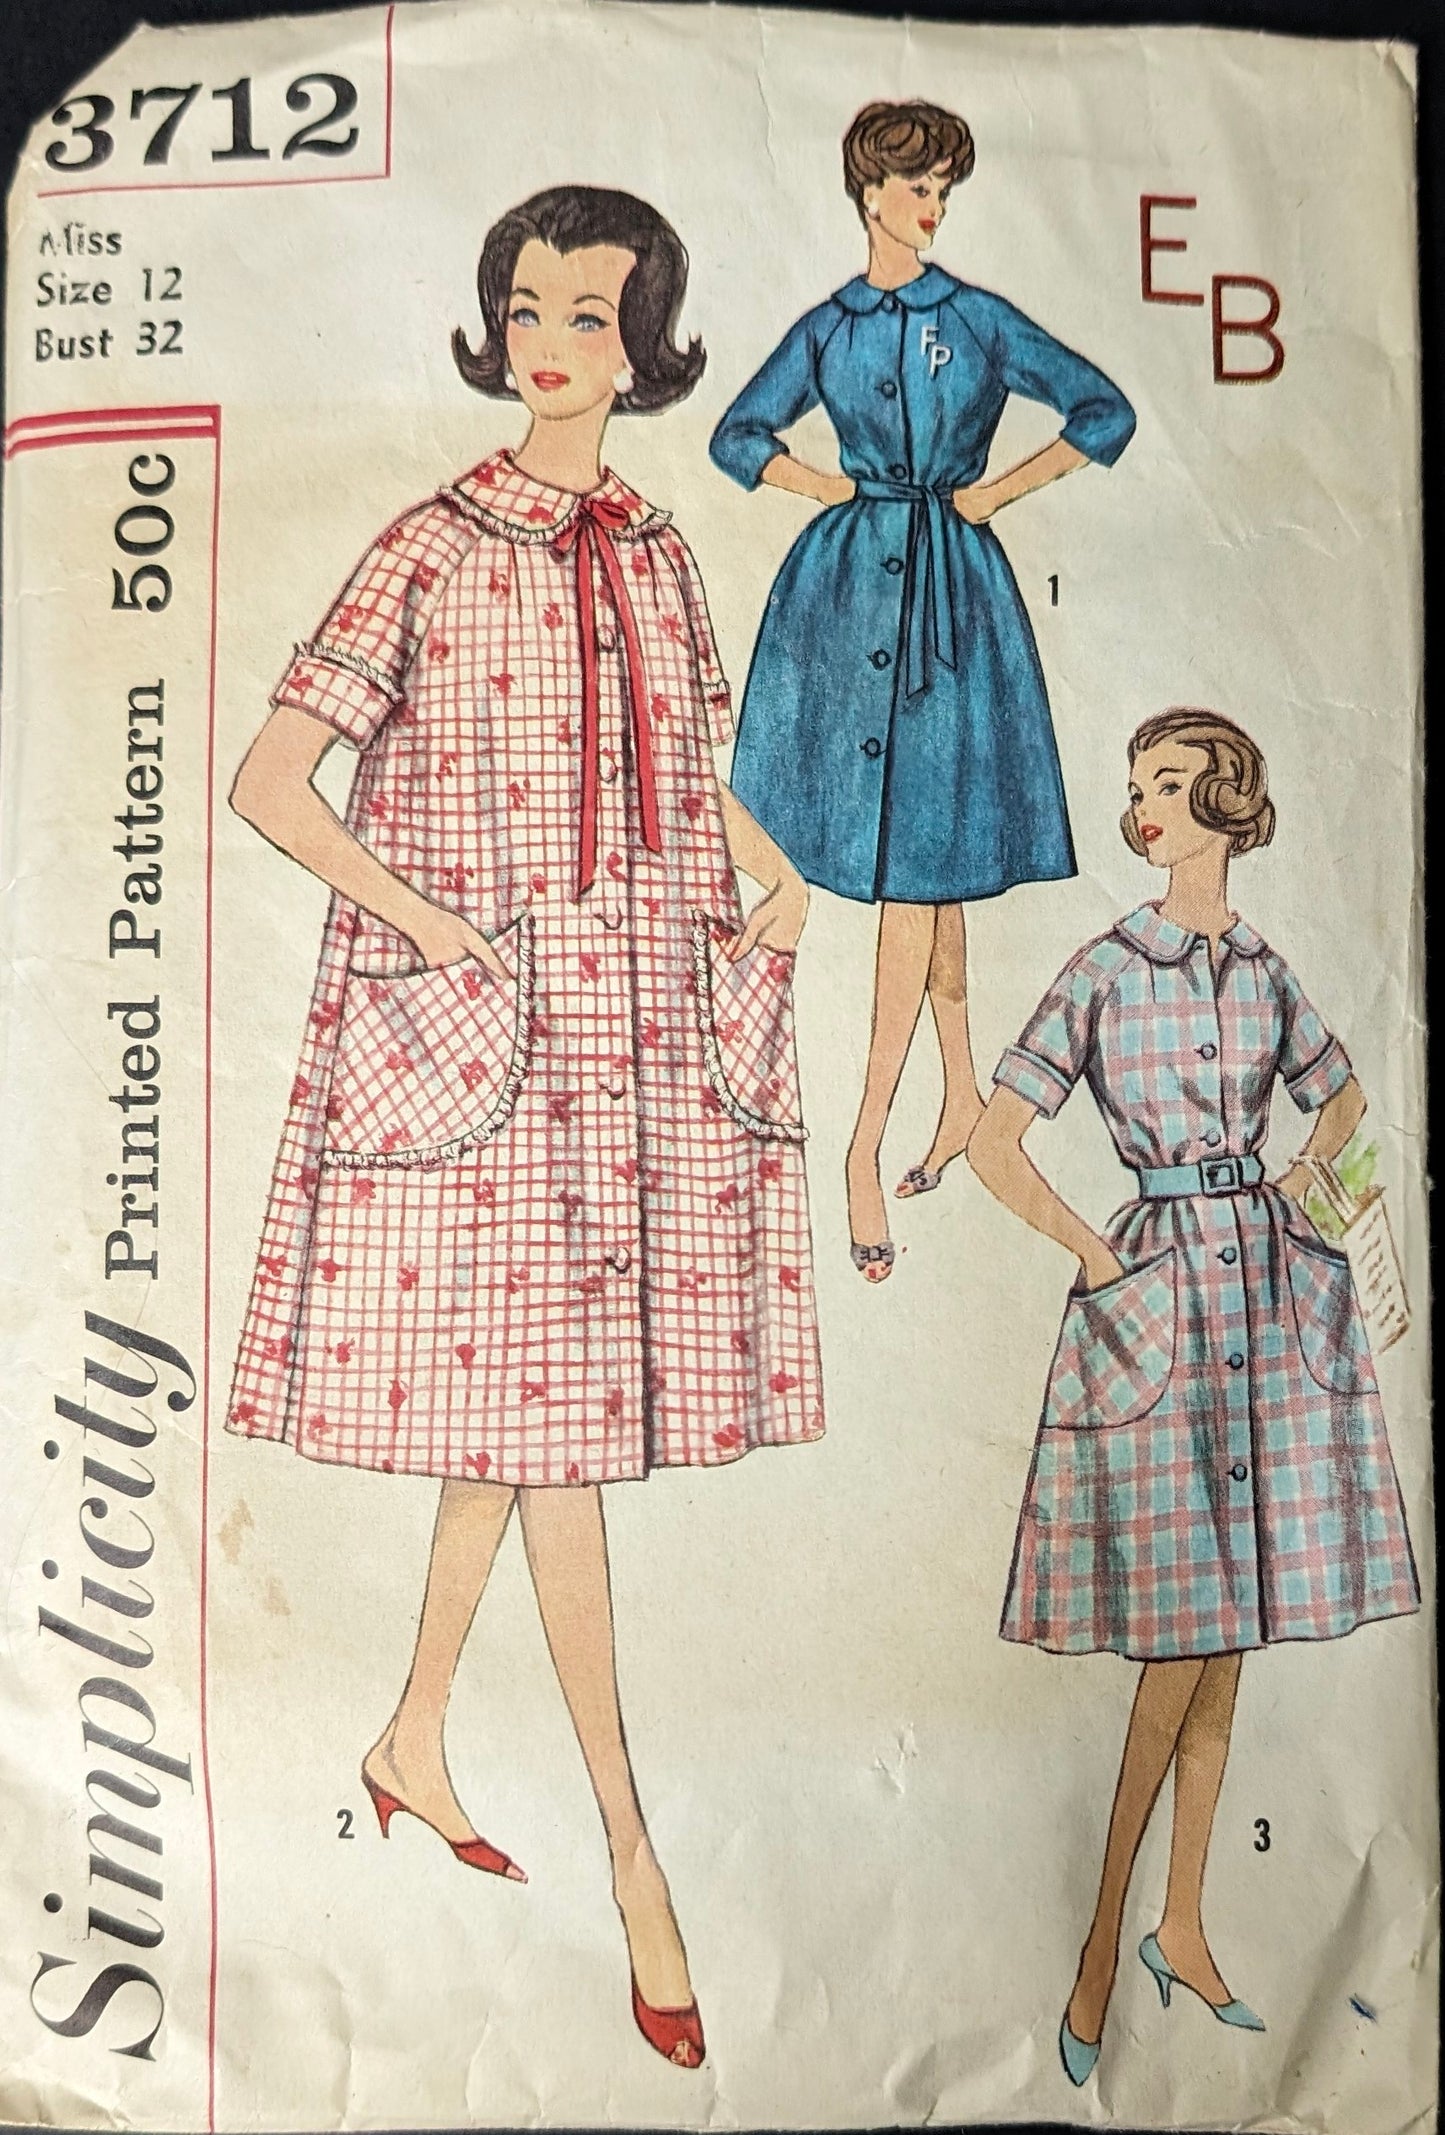 1950s - 1960s Original Vintage Sewing Pattern: Simplicity 3712 Size 12